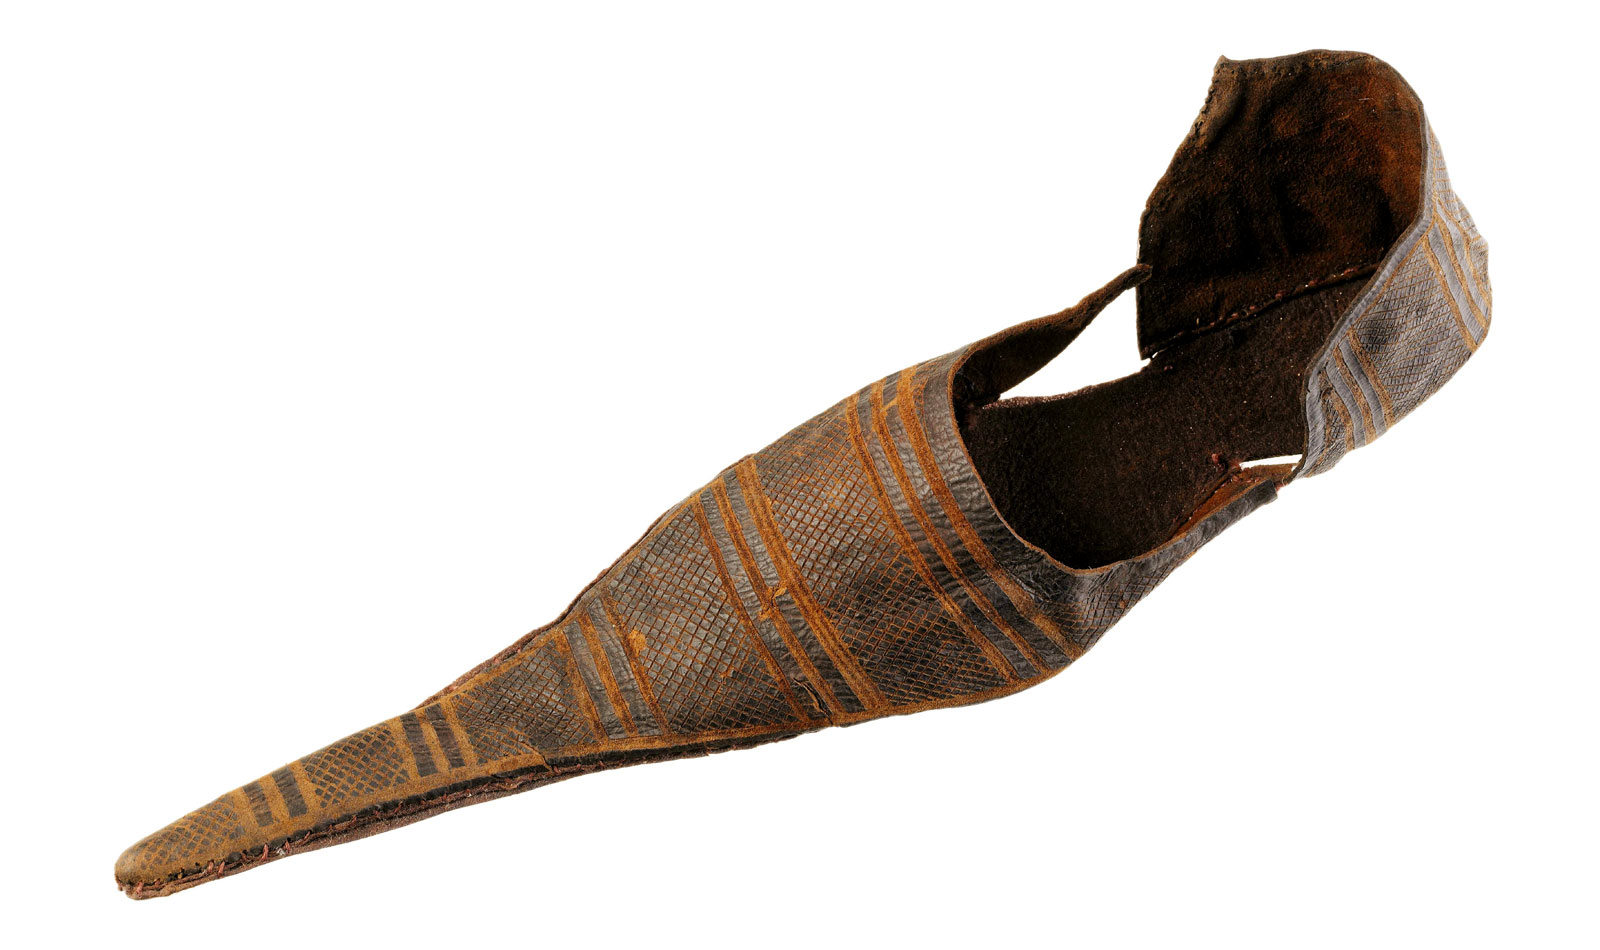 A medieval pointed shoe, known as a poulaine.